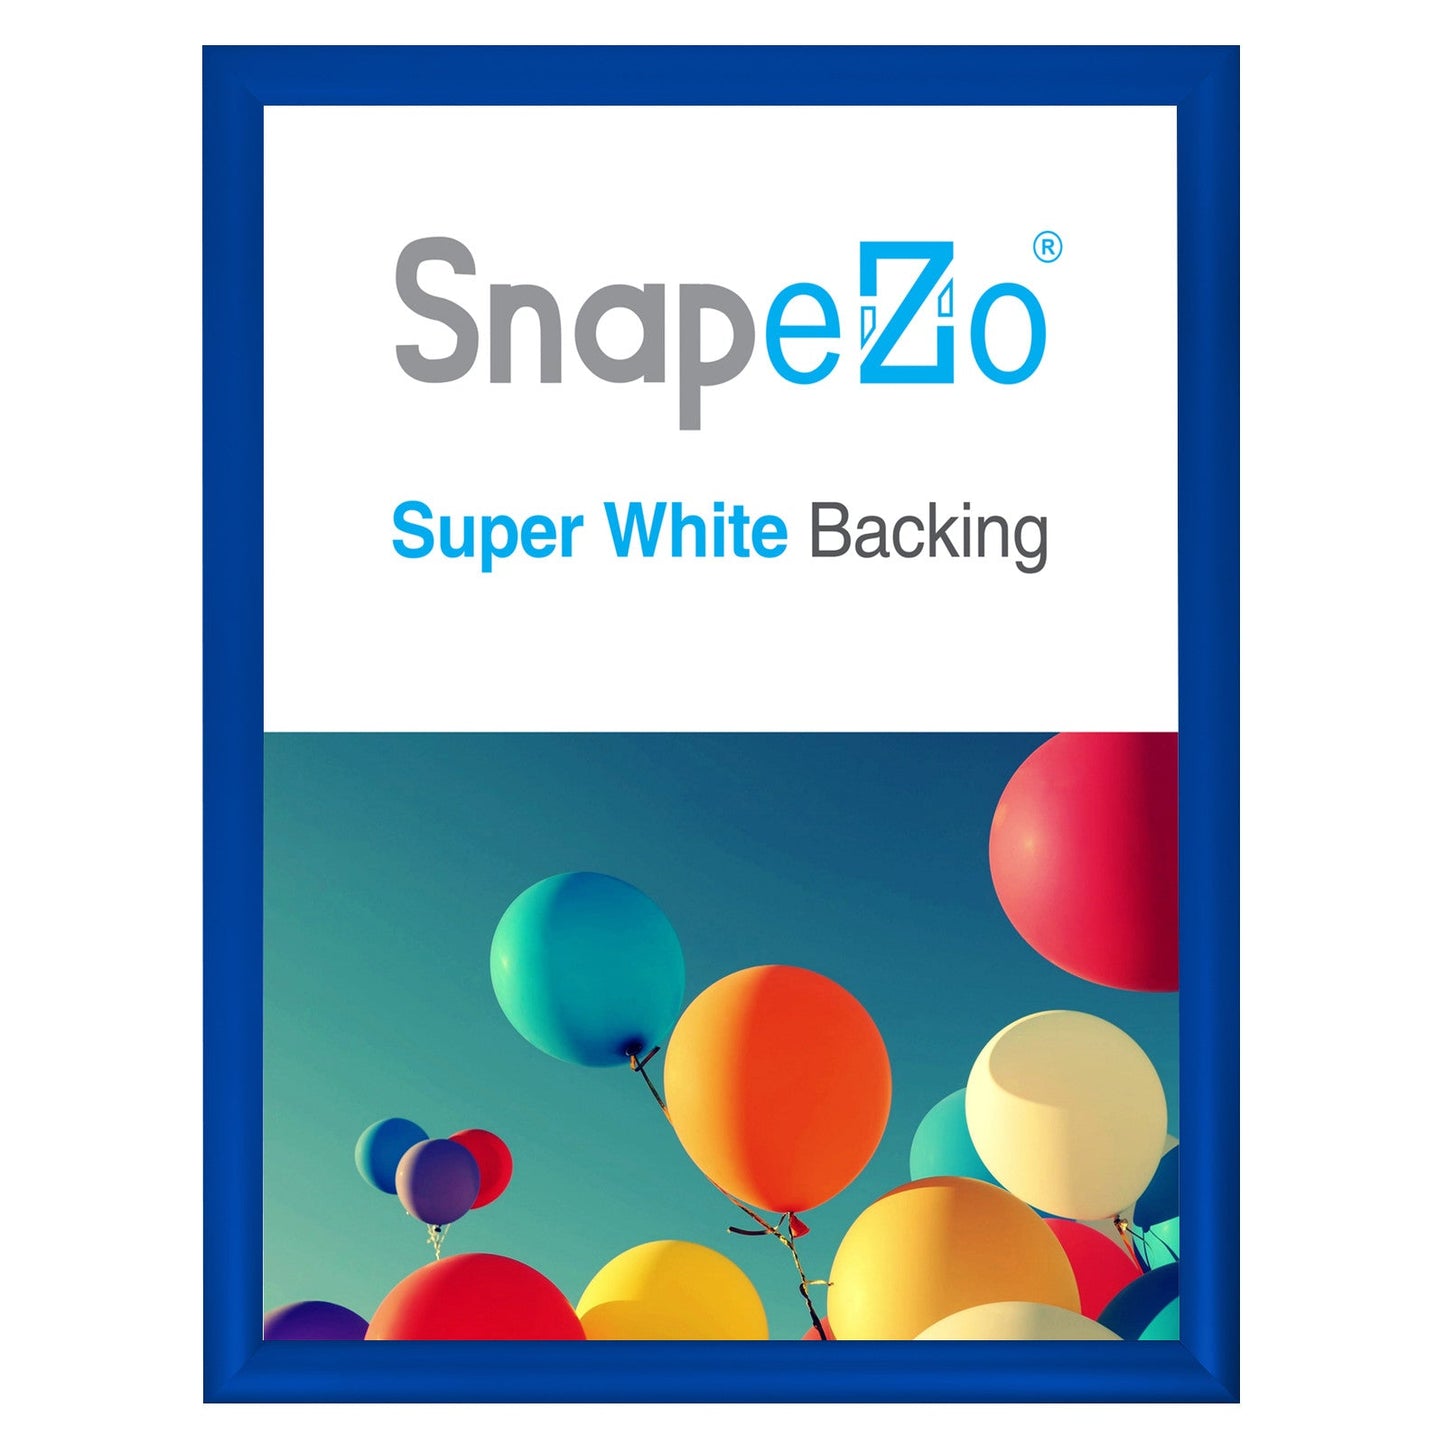 Load image into Gallery viewer, 14x18 Blue SnapeZo® Snap Frame - 1.2&amp;quot; Profile
